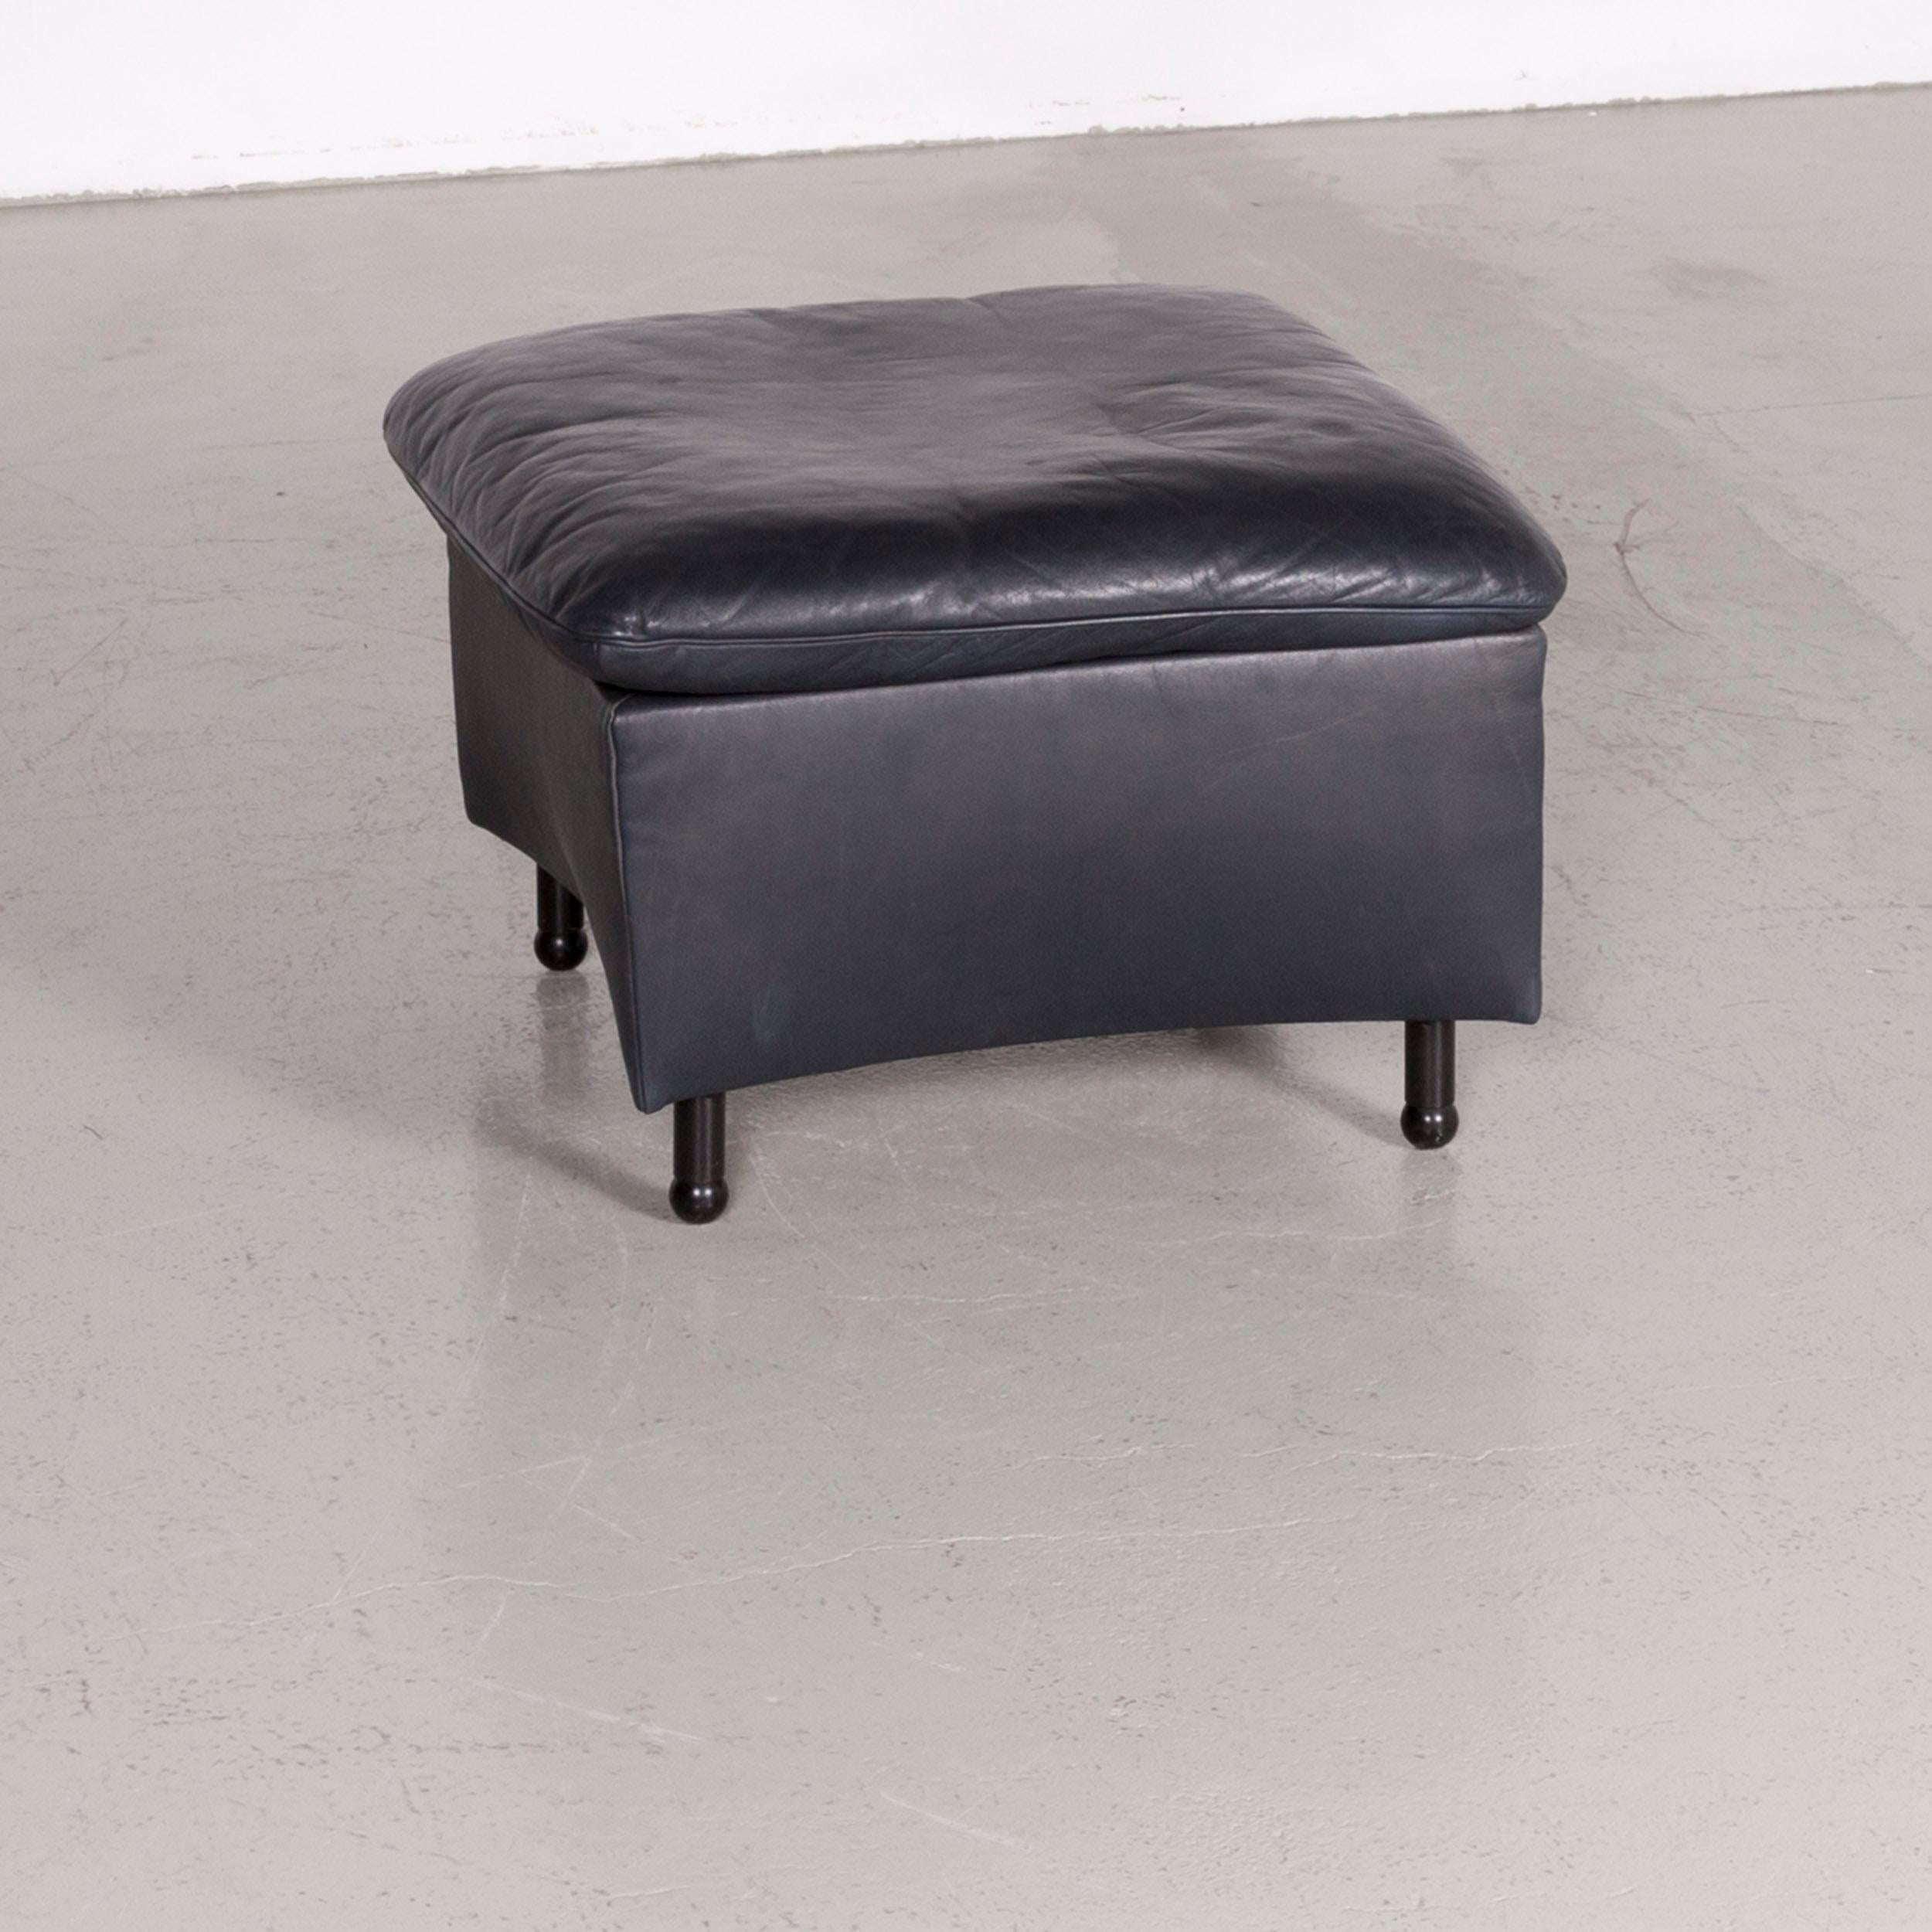 We bring to you a De Sede designer leather stool blue genuine leather.

Product measurements in centimeters:

Depth 60
Width 60
Height 40.





            